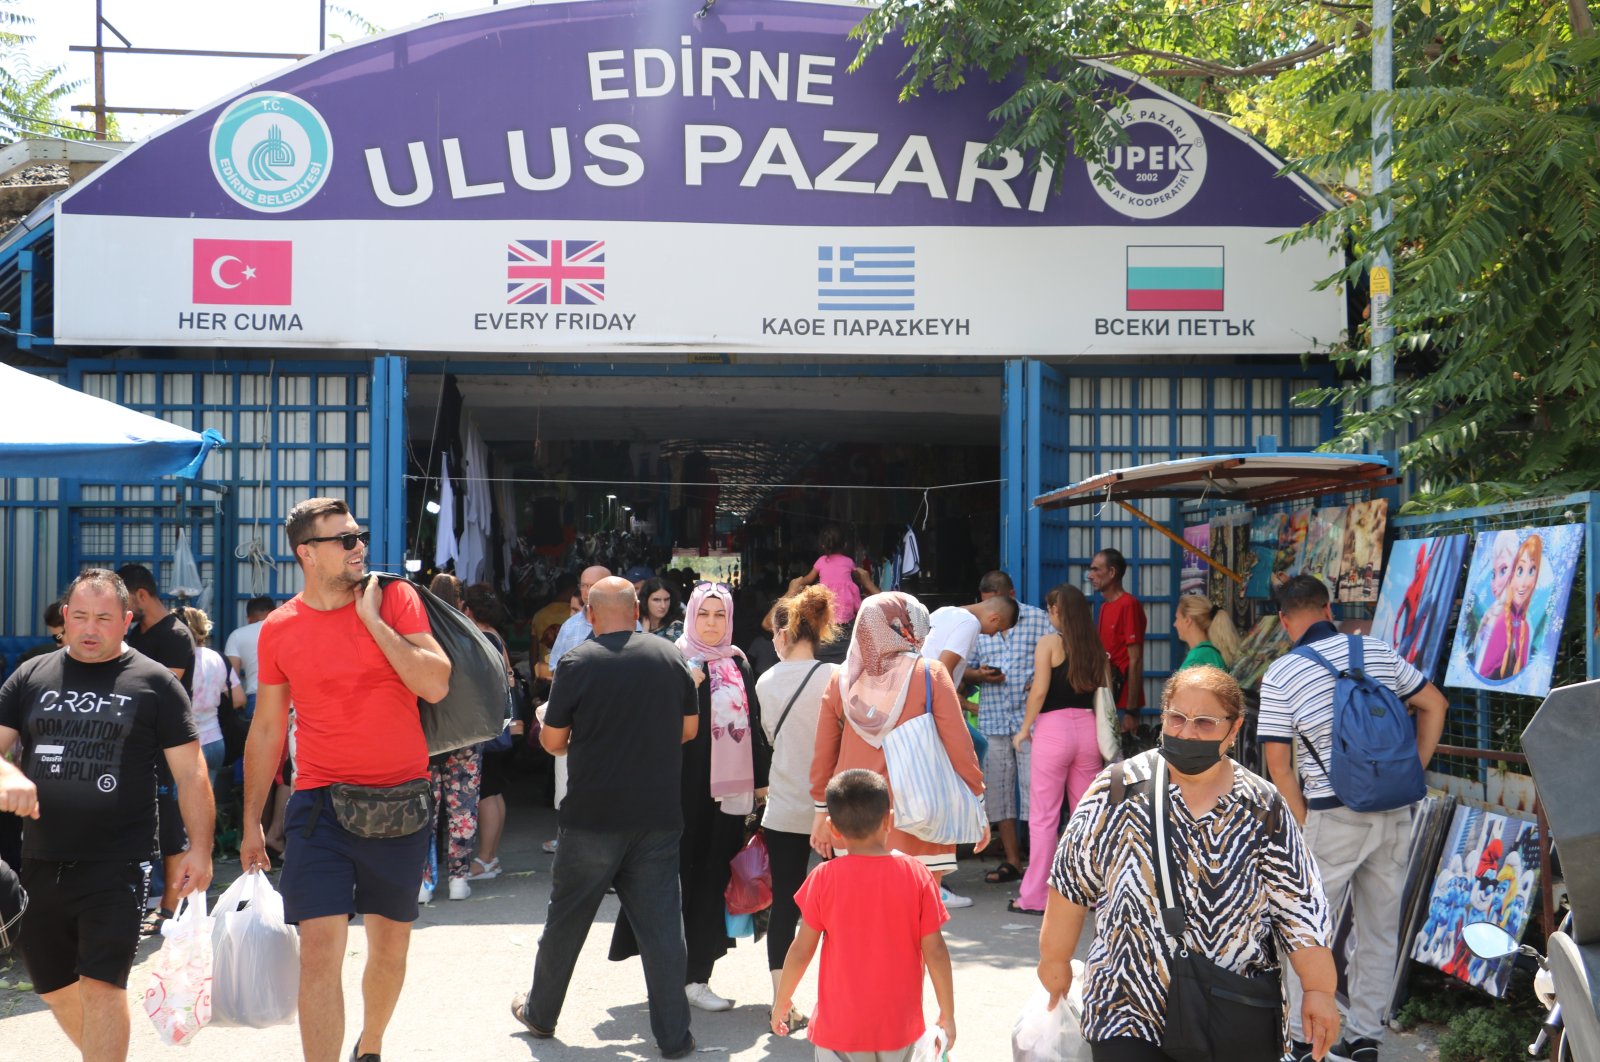 Locals and tourists are seen entering and exiting Ulus Pazarı, a famous local marketplace in the northwestern province of Edirne, Türkiye, Aug. 19, 2022. (IHA Photo)